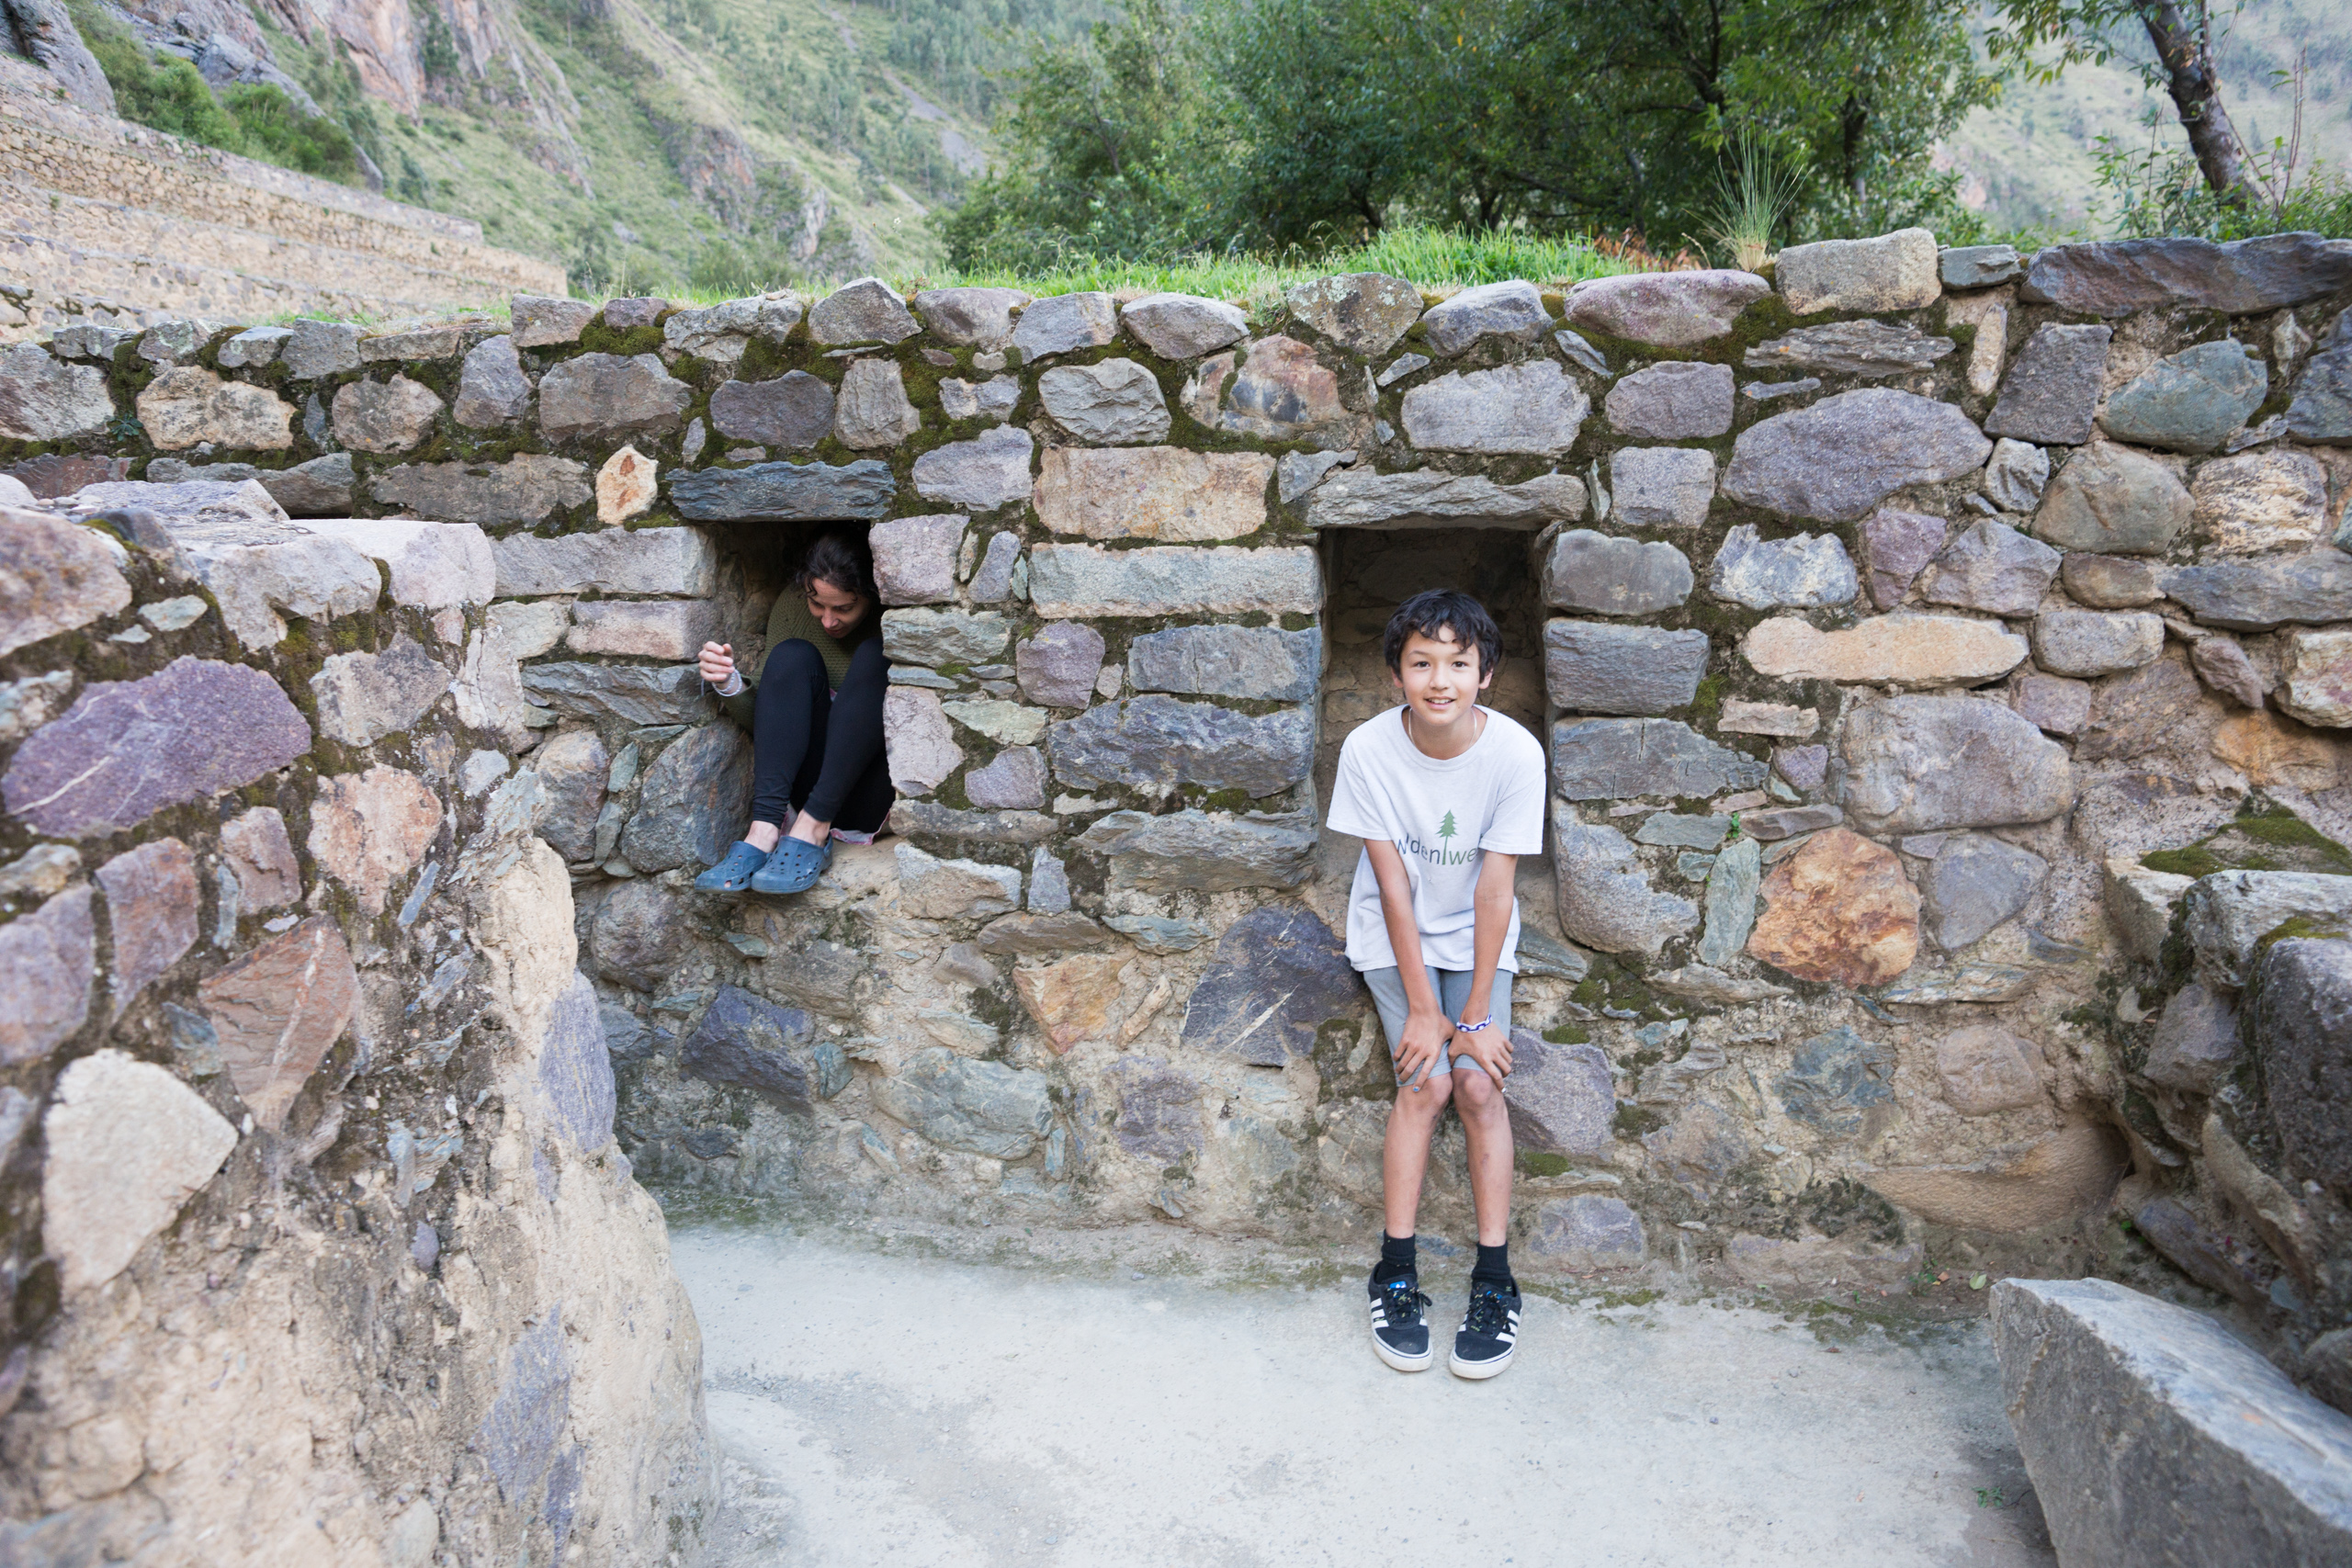 Temple of the Condor at Ollantaytambo.  Nobu and Megan are trying to fit in.